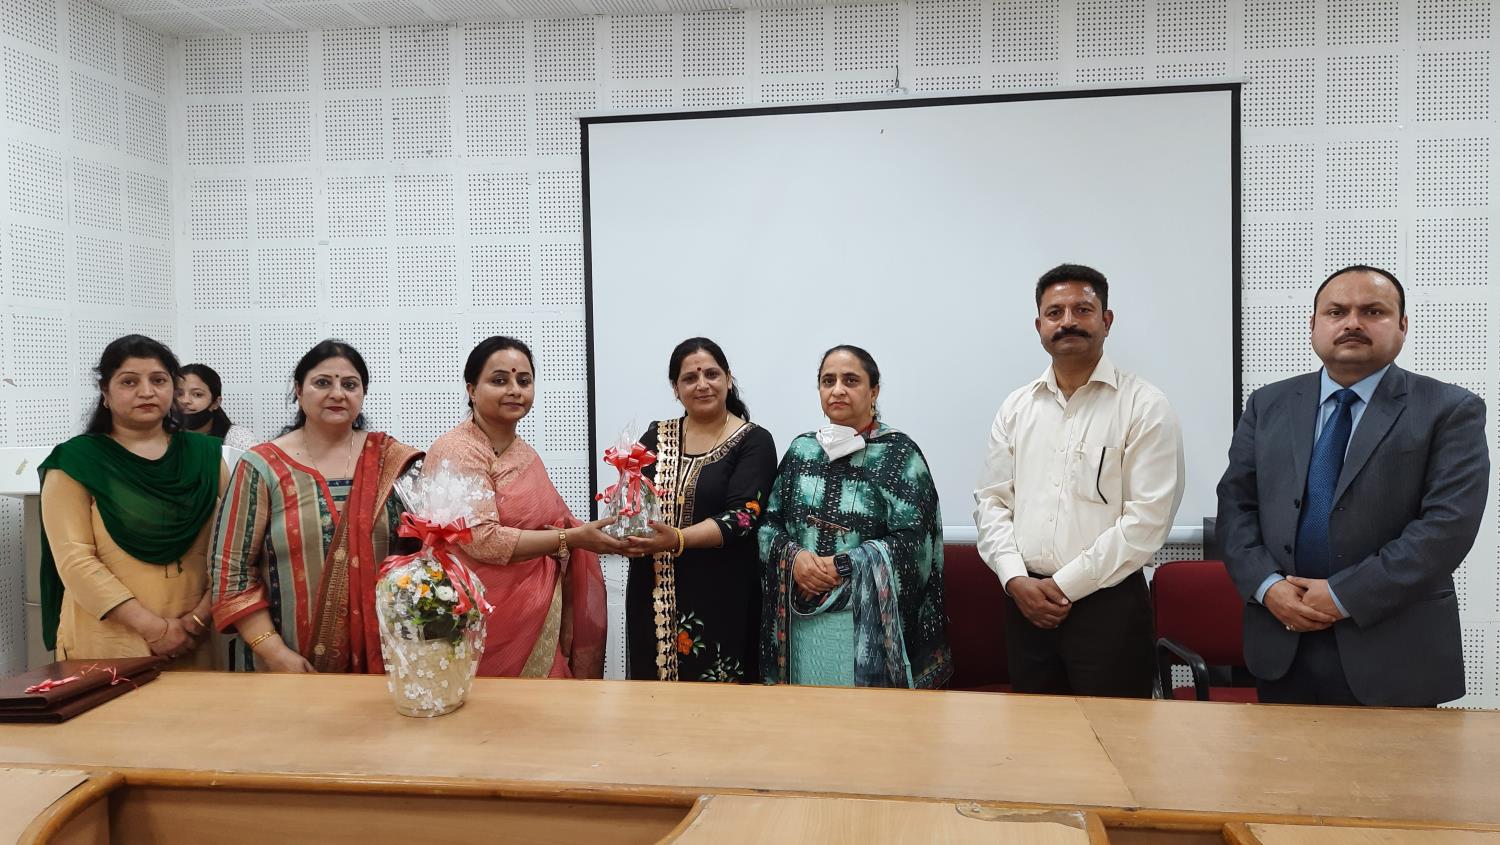  MoU Signed between Dogra College of Education and Govt. College of Education Jammu (J&K)